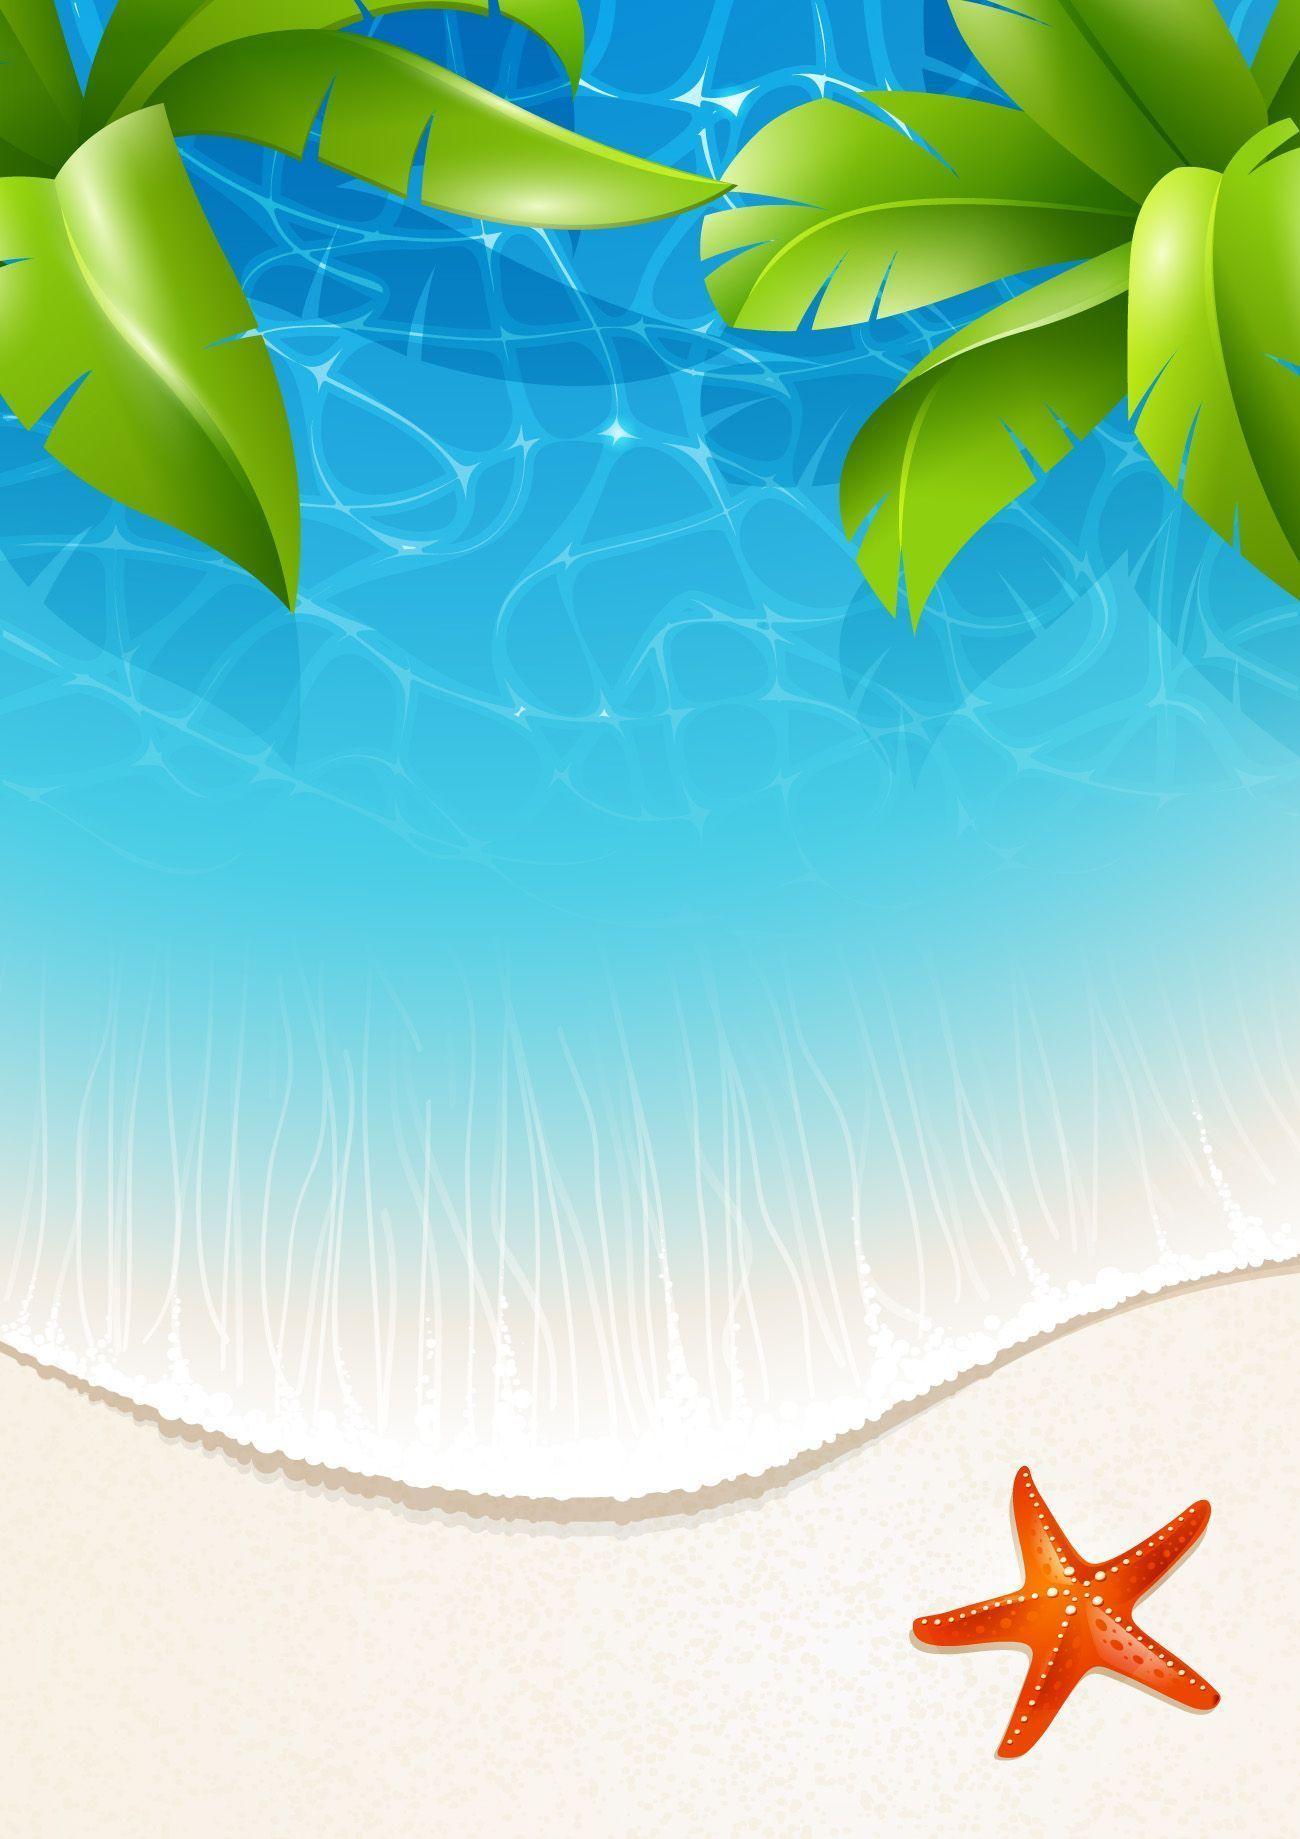 Tropical Background Images - Wallpaper Cave